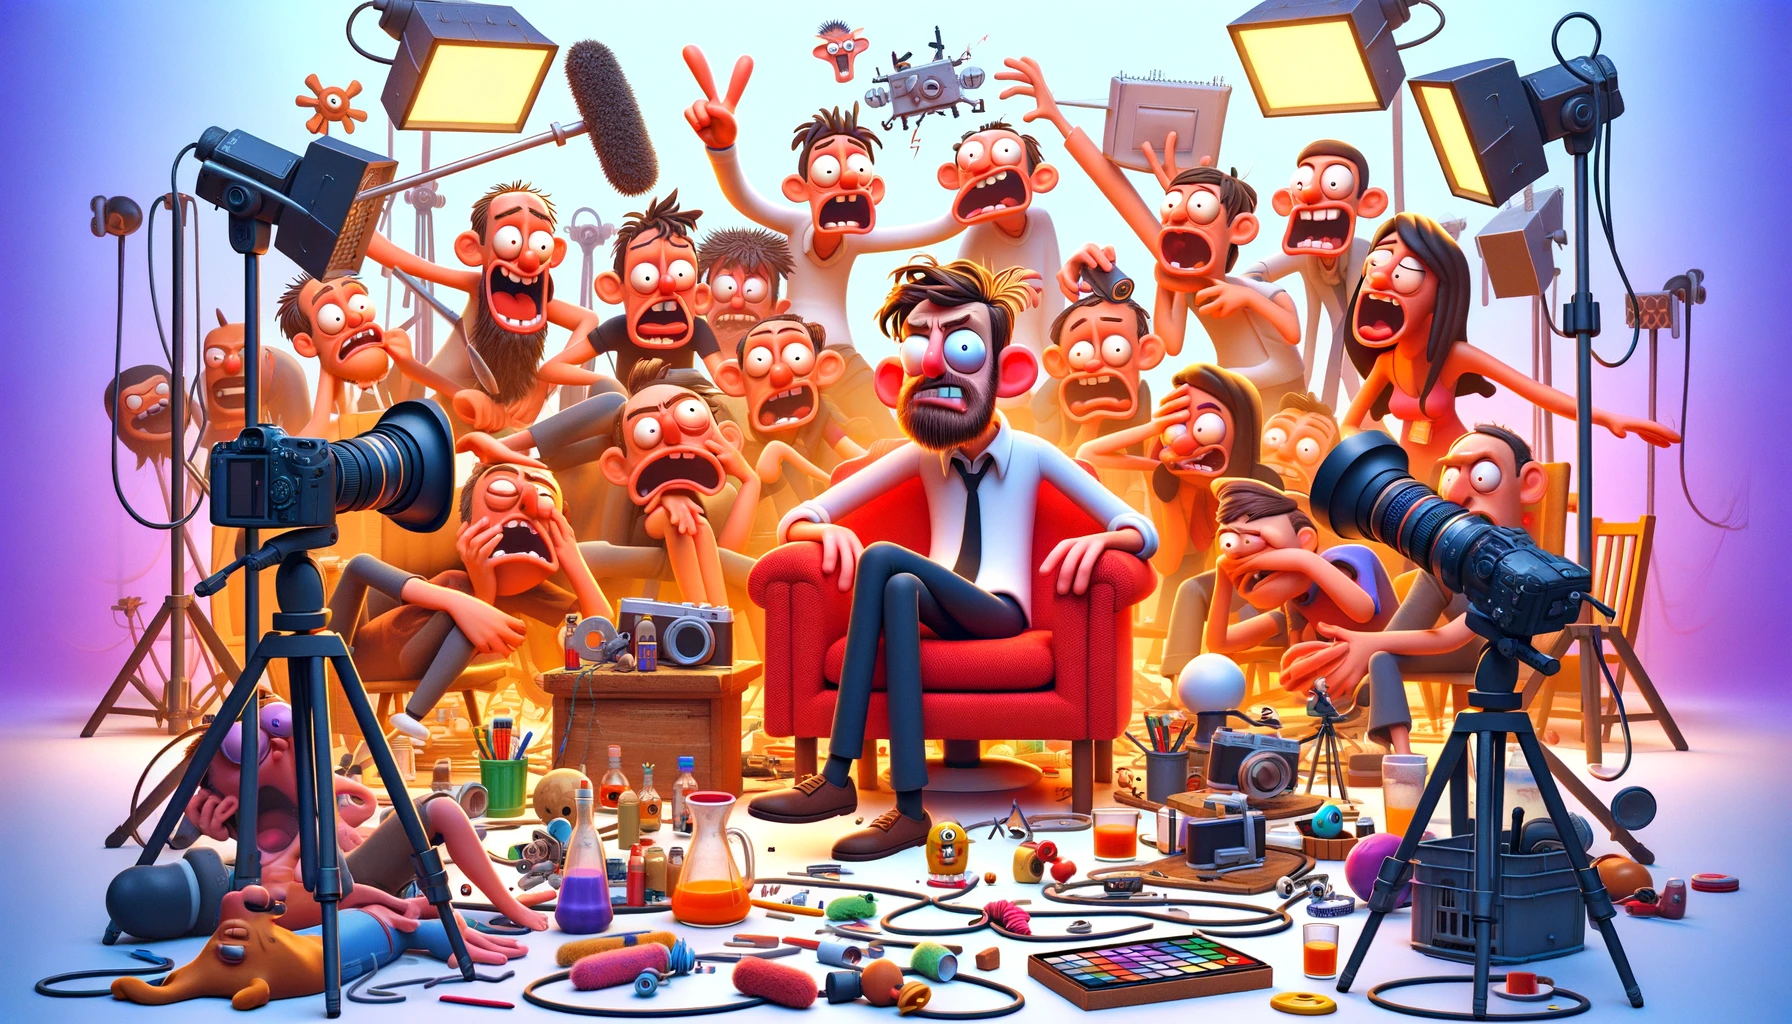 Animated characters in a colorful 3D world experiencing humorous mishaps, showcasing exaggerated expressions and odd poses, symbolizing the playful chaos of 3D animation.